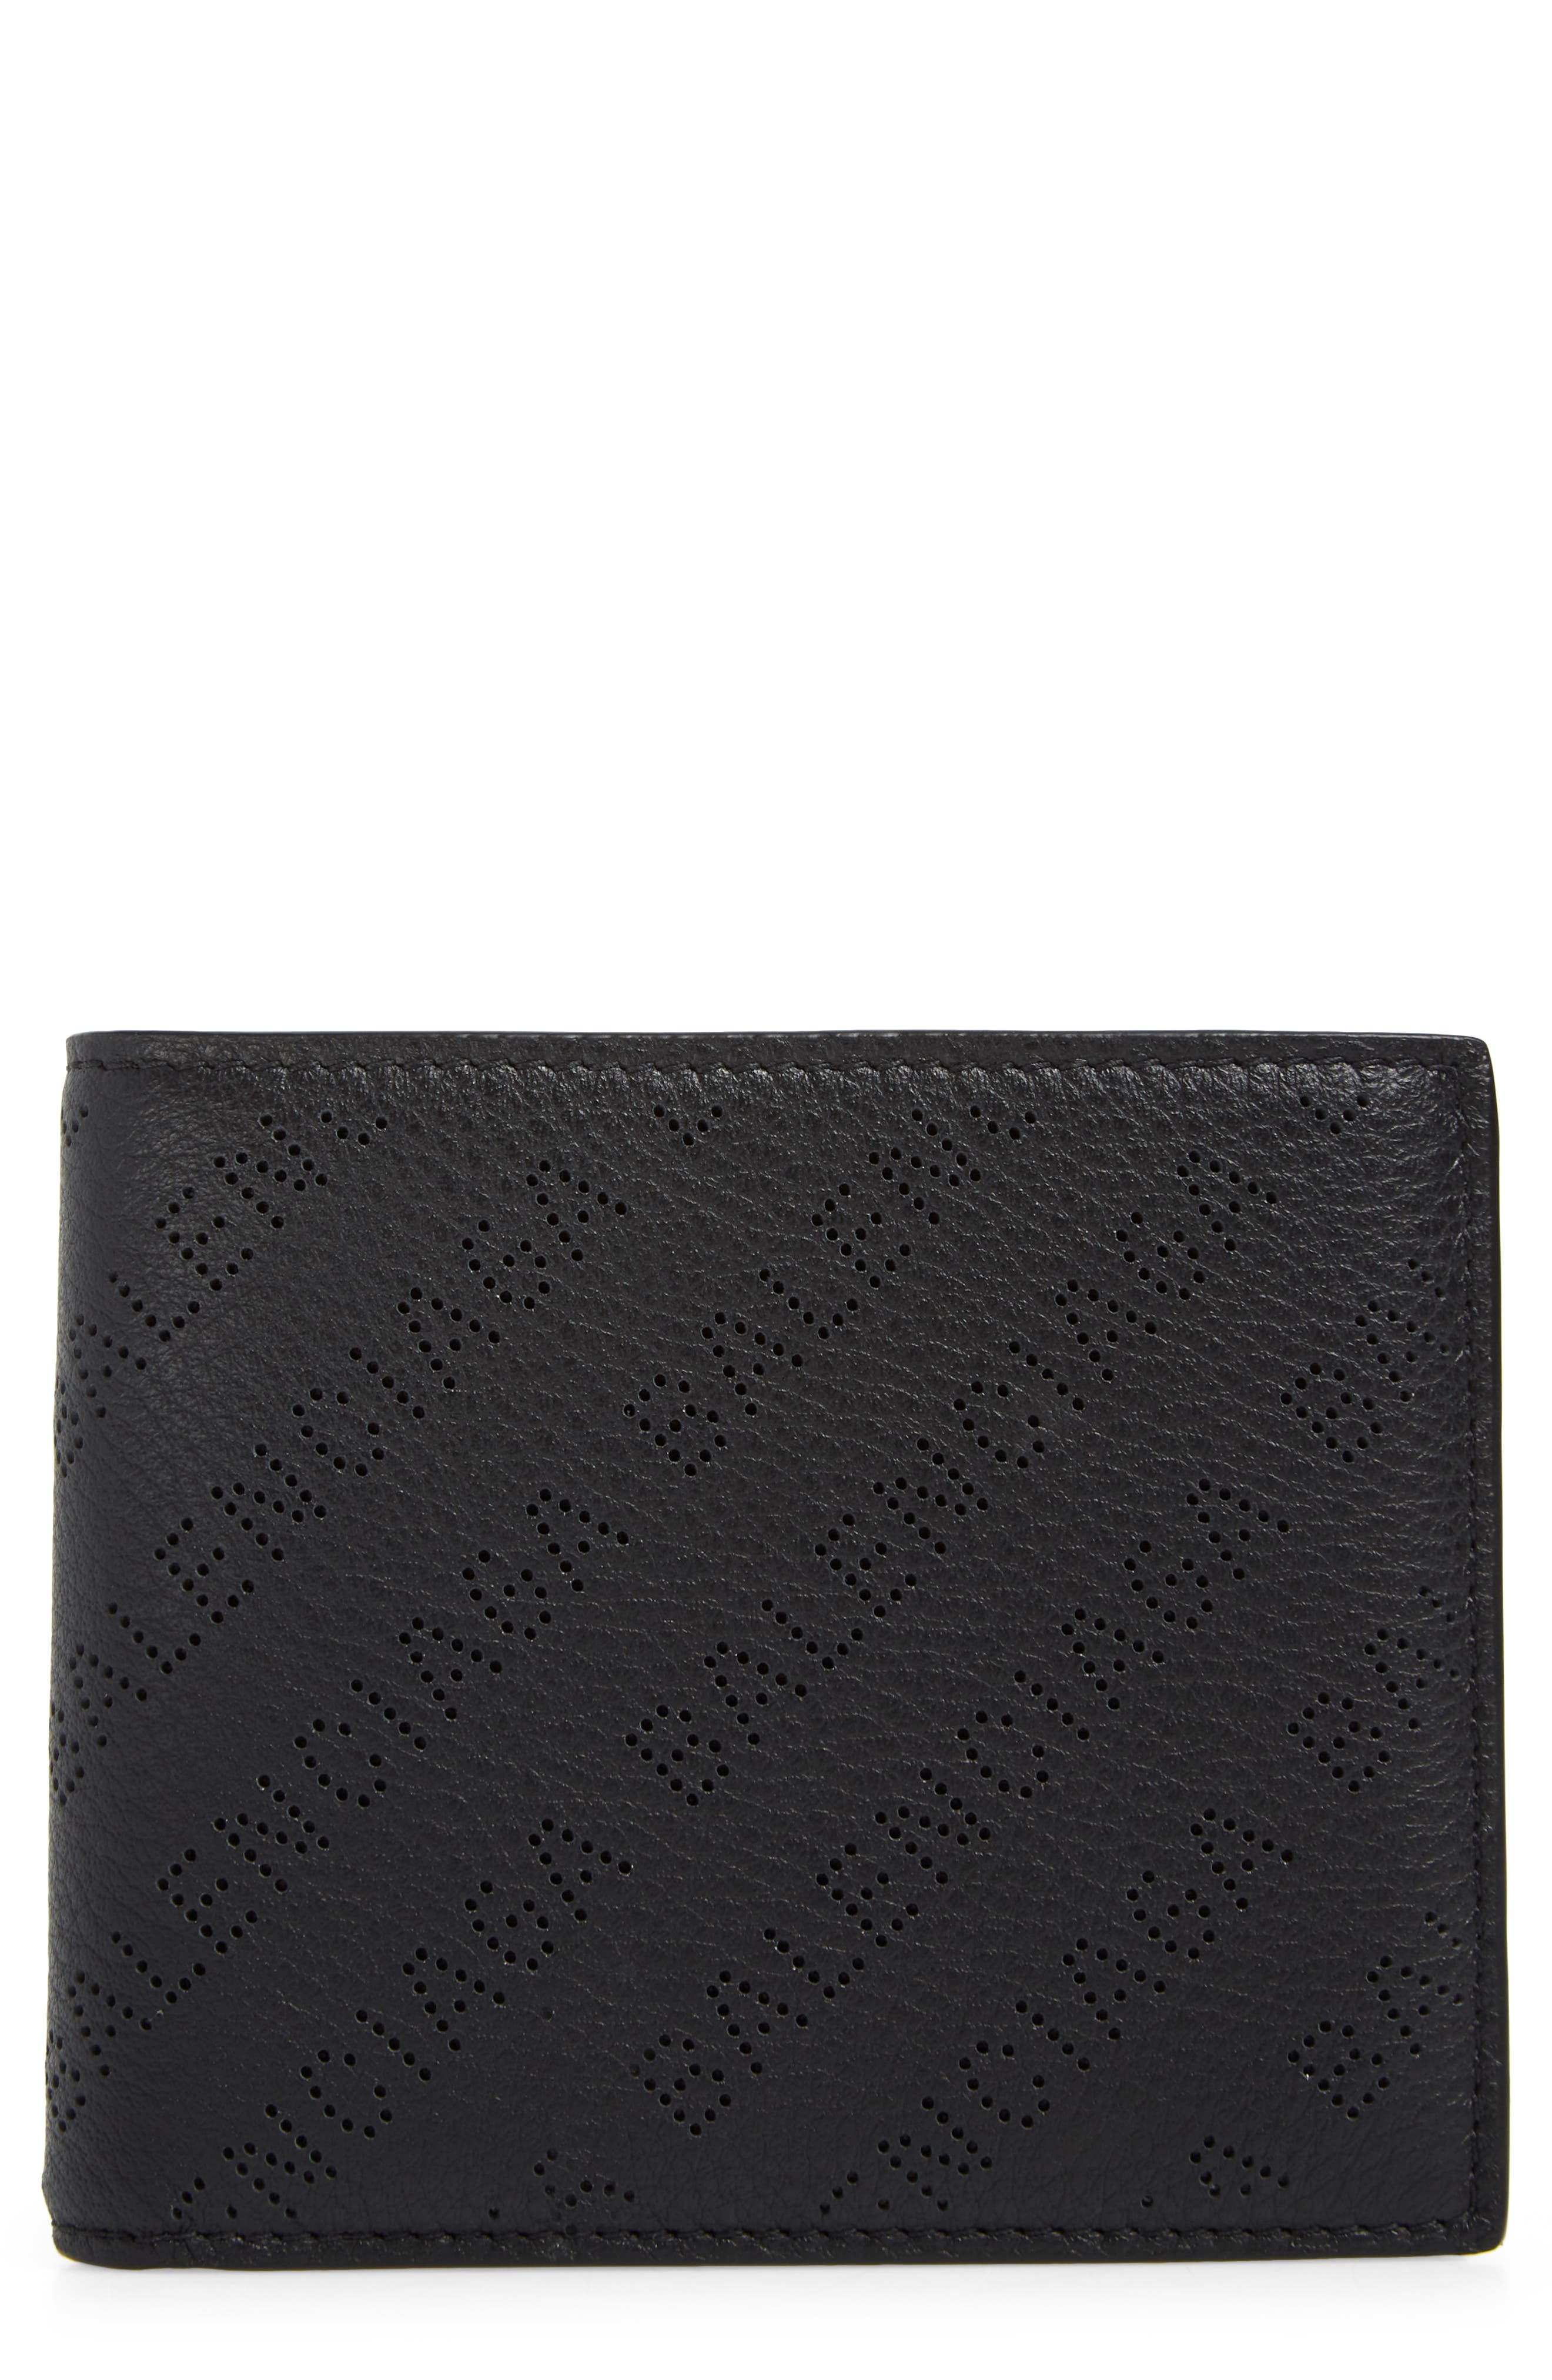 Balenciaga Perforated Logo Leather Bifold Wallet in Black at Nordstrom